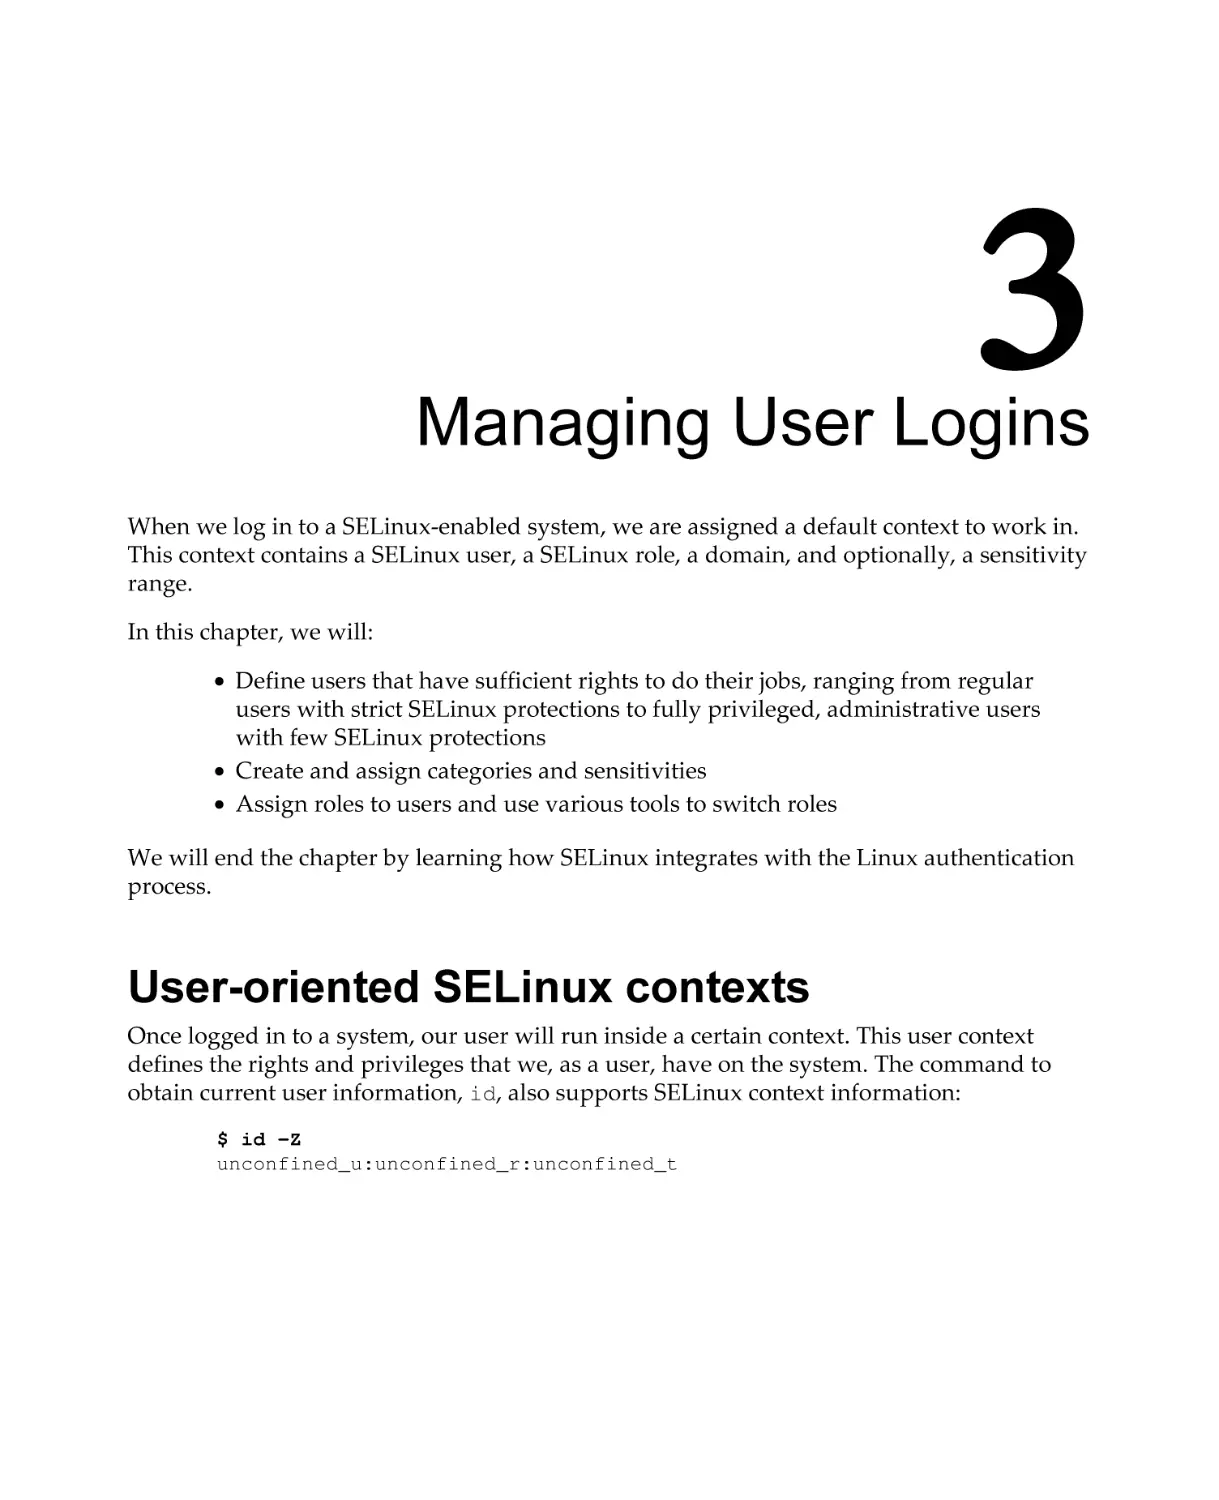 Chapter 3
User-oriented SELinux contexts